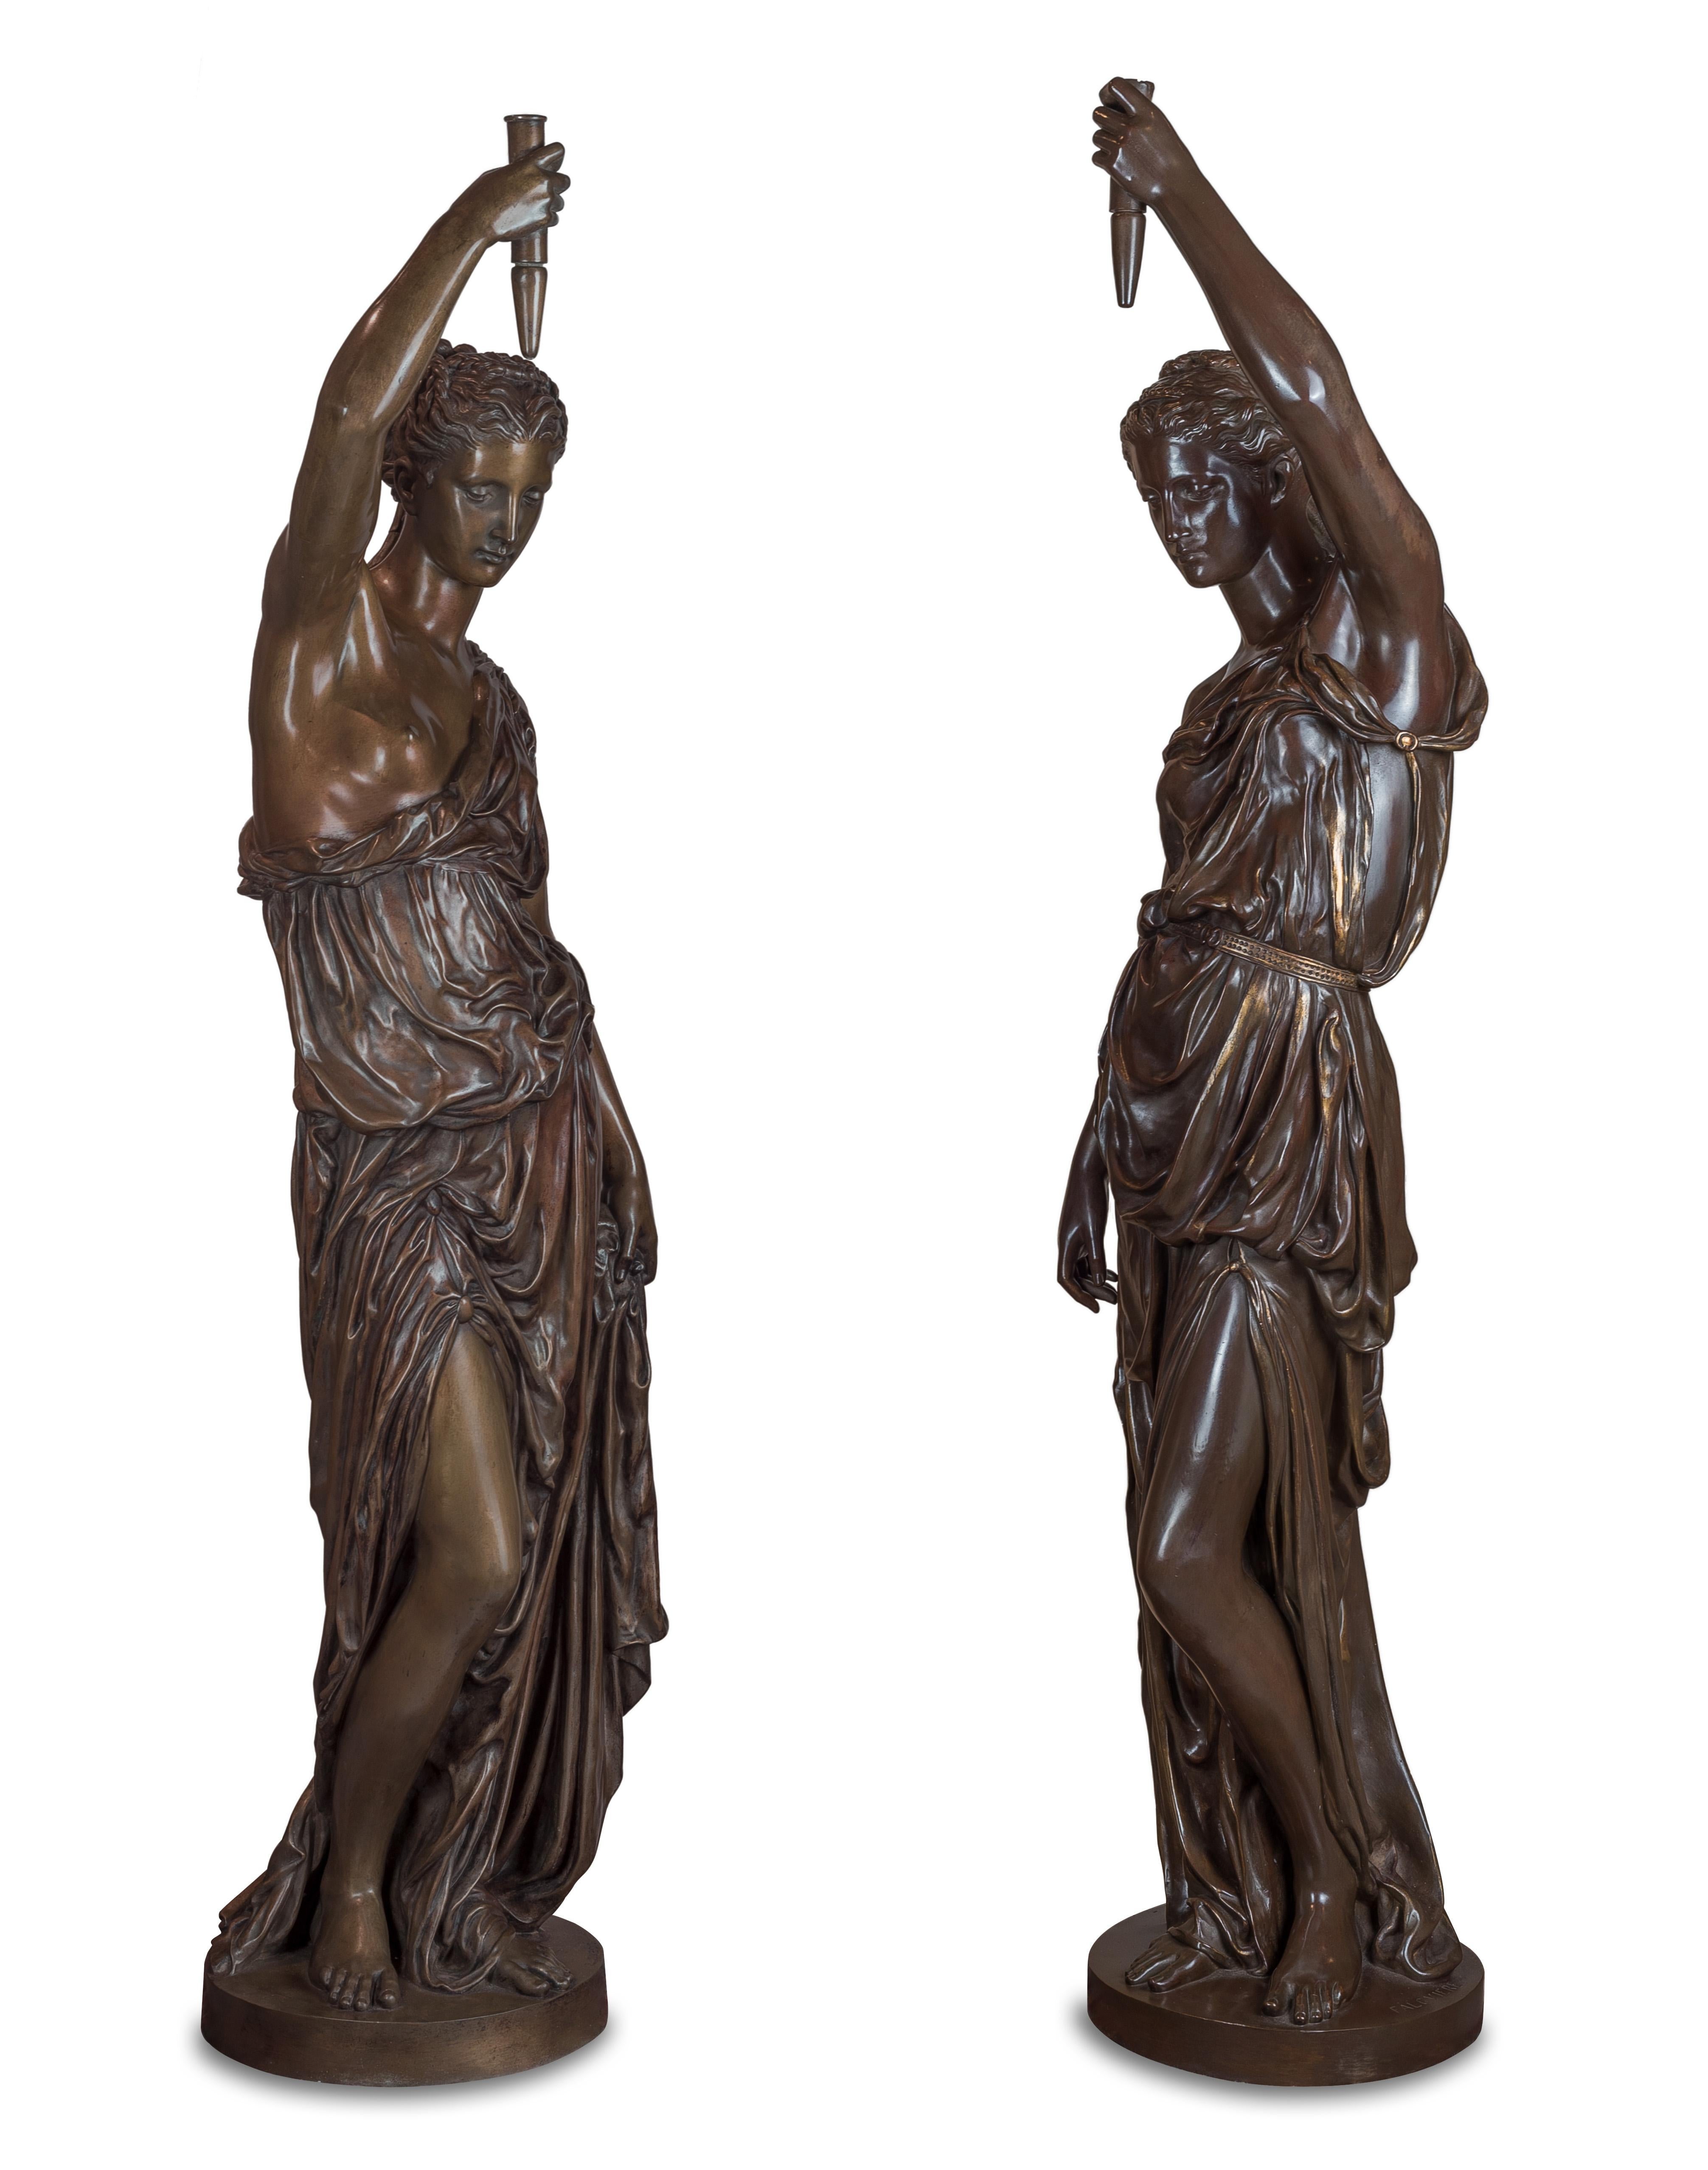 Mounted as lamps and cast by Ferdinand Barbedienne after models by Alexandre Falguiere and Paul Dubois. Both statues are signed on the bases. 

These fine torchères are reductions of a pair exhibited by Dubois at the 1867 Exposition Universelle,